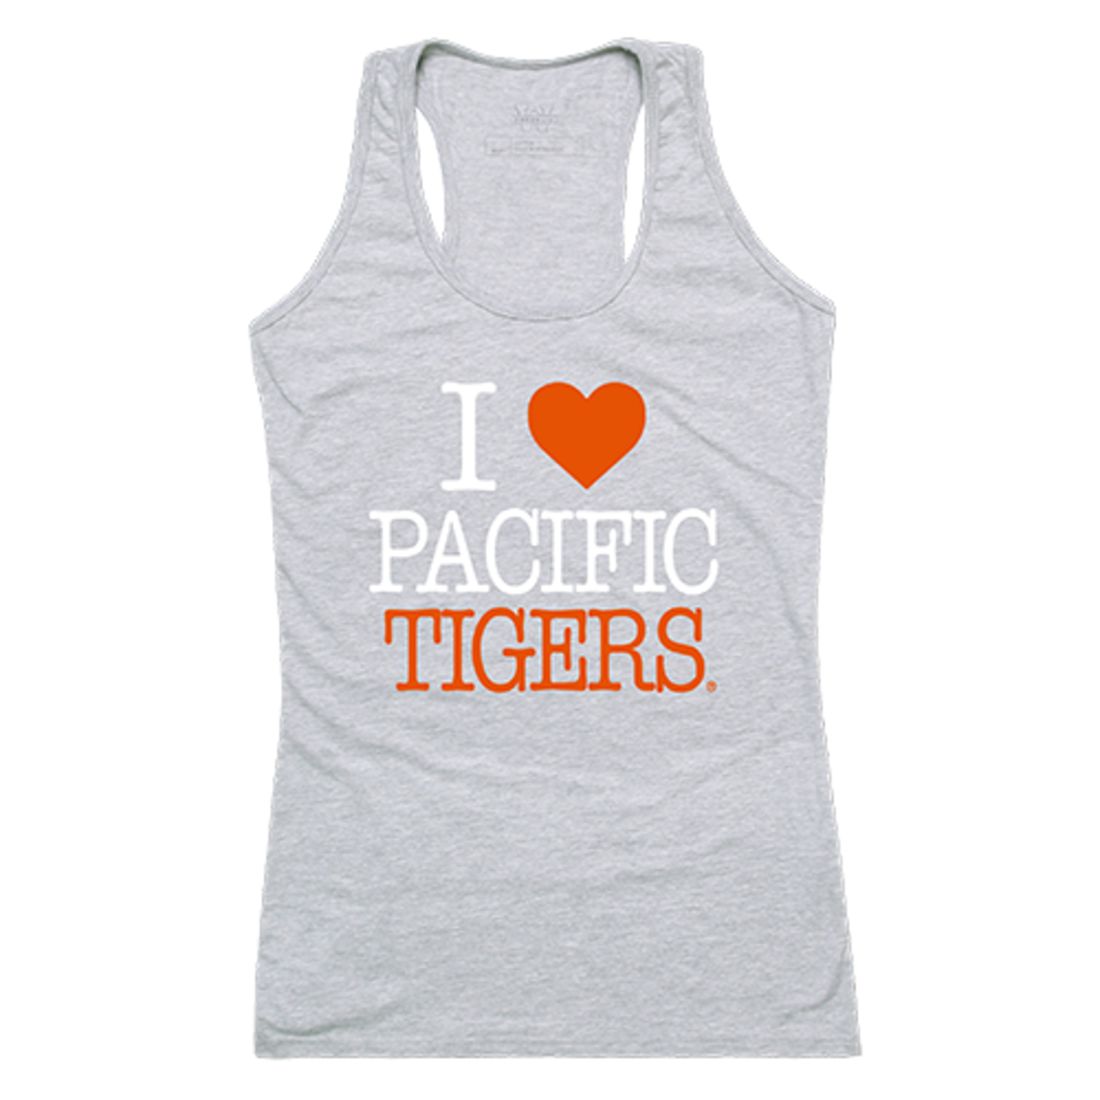 University of the Pacific Tigers Womens Love Tank Top Tee T-Shirt Heather Grey-Campus-Wardrobe